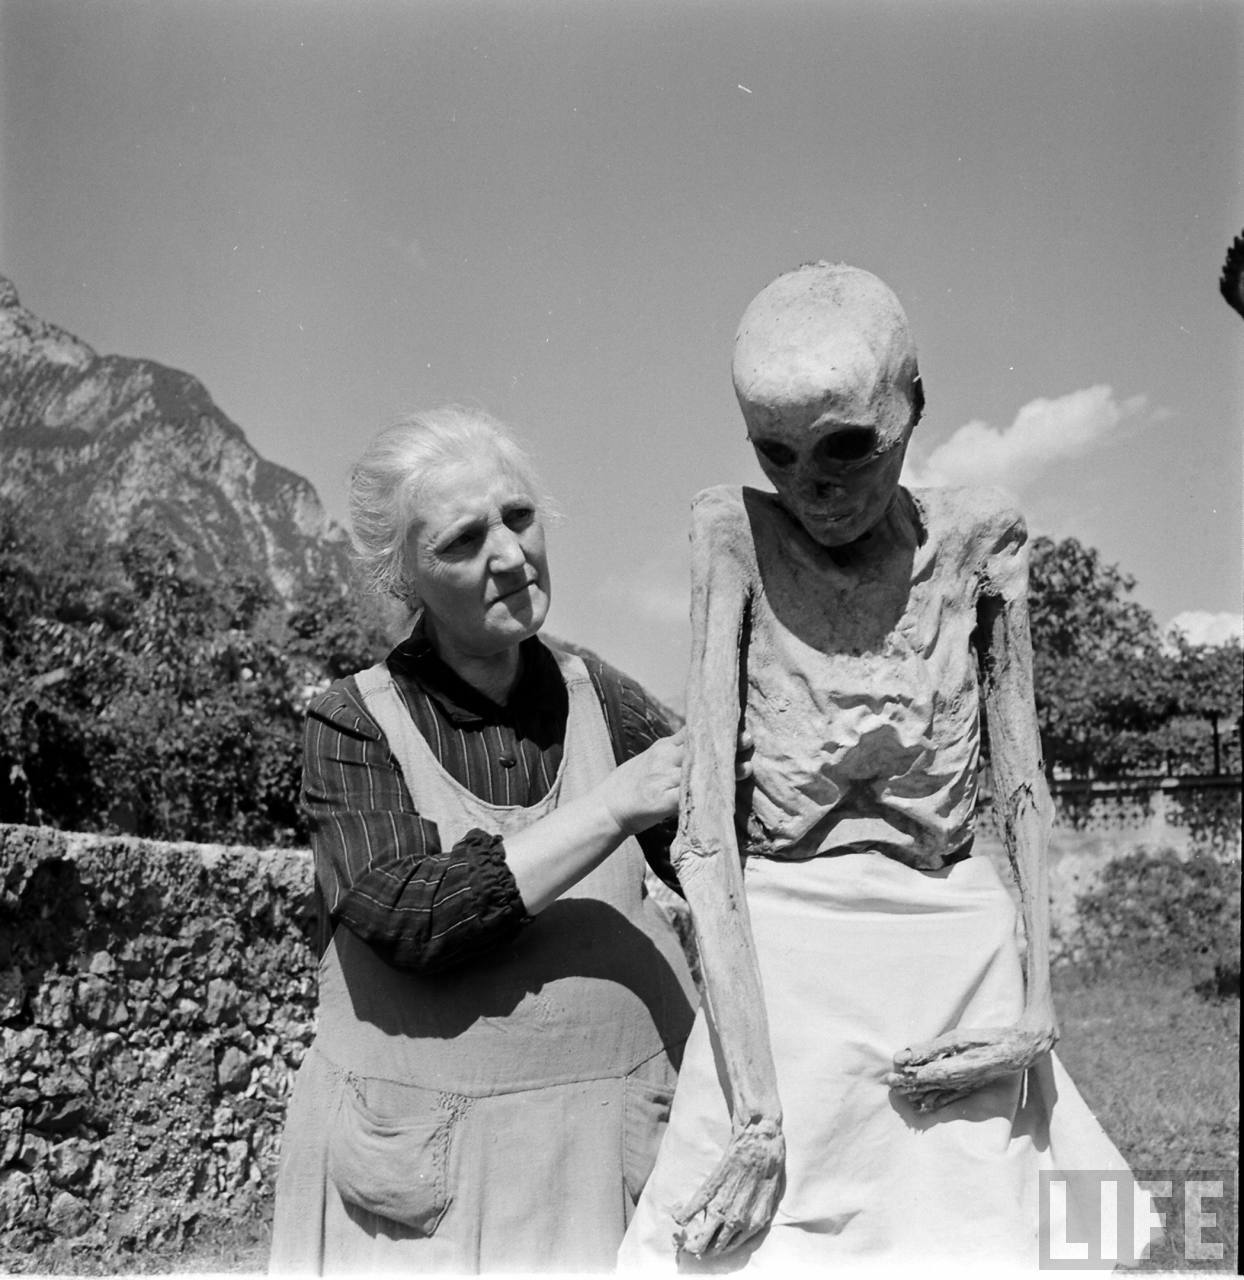 Candid PH๏τographs Captured People Living a Normal Life With Mummies in Venzone, Italy in 1950 ~ Vintage Everyday